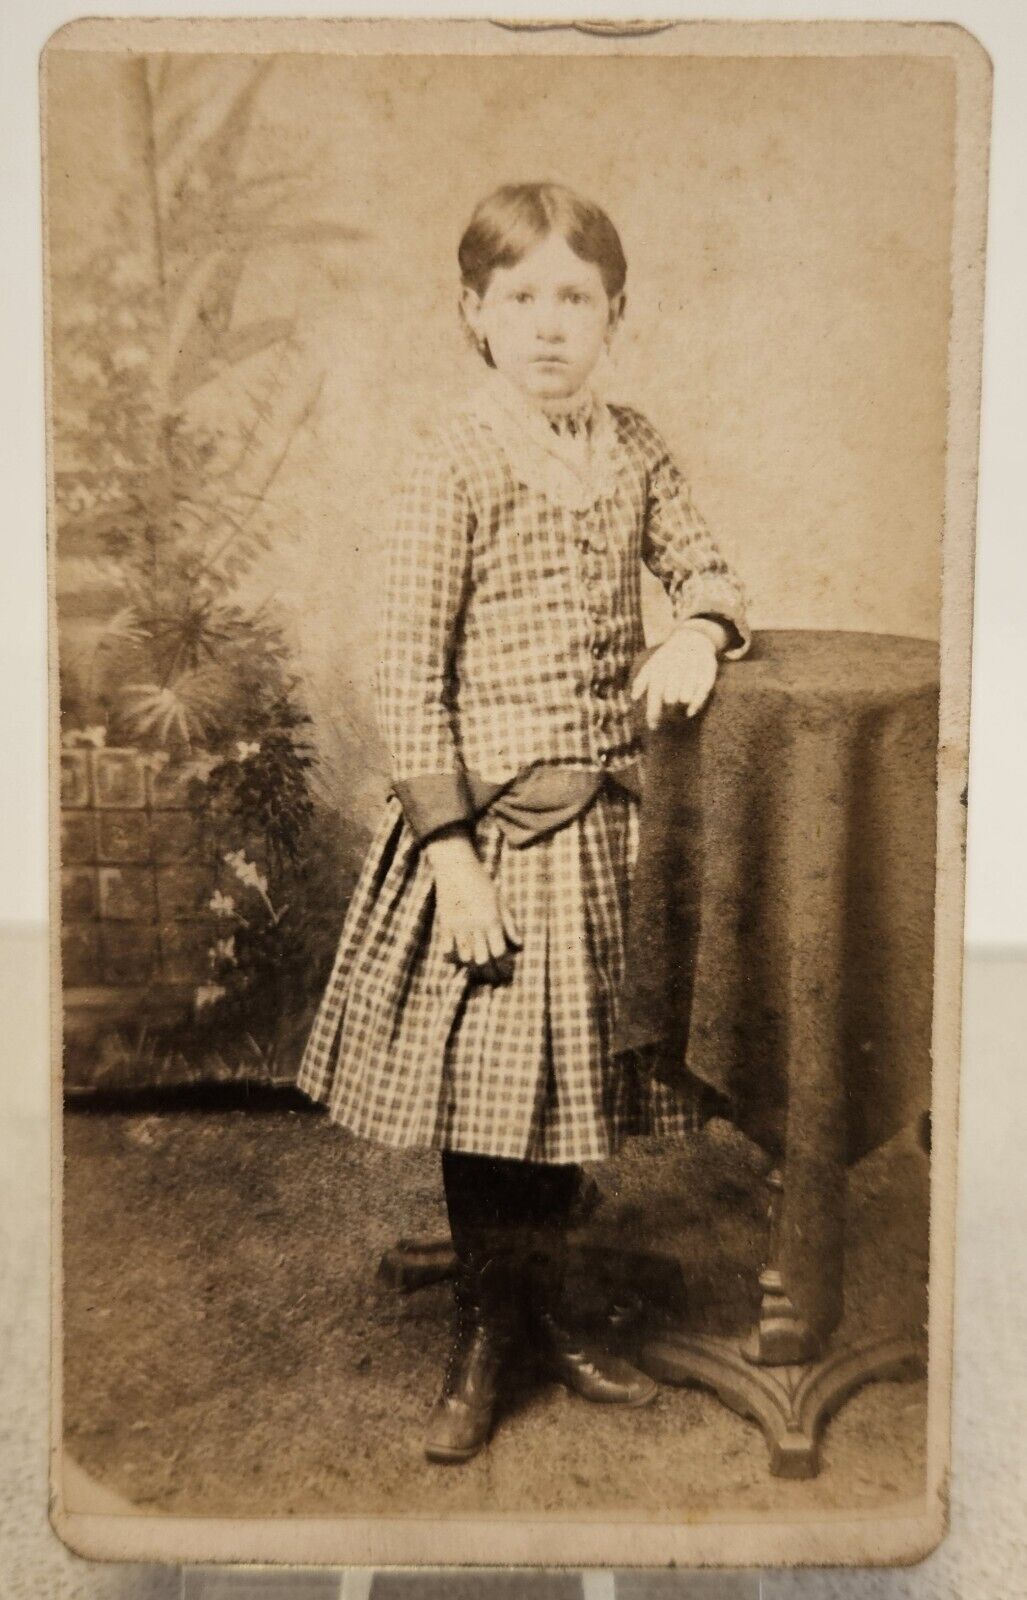 Antique CDV IMAGE OF STANDING YOUNG GIRL Photo by B.M. PEARSON Photographer